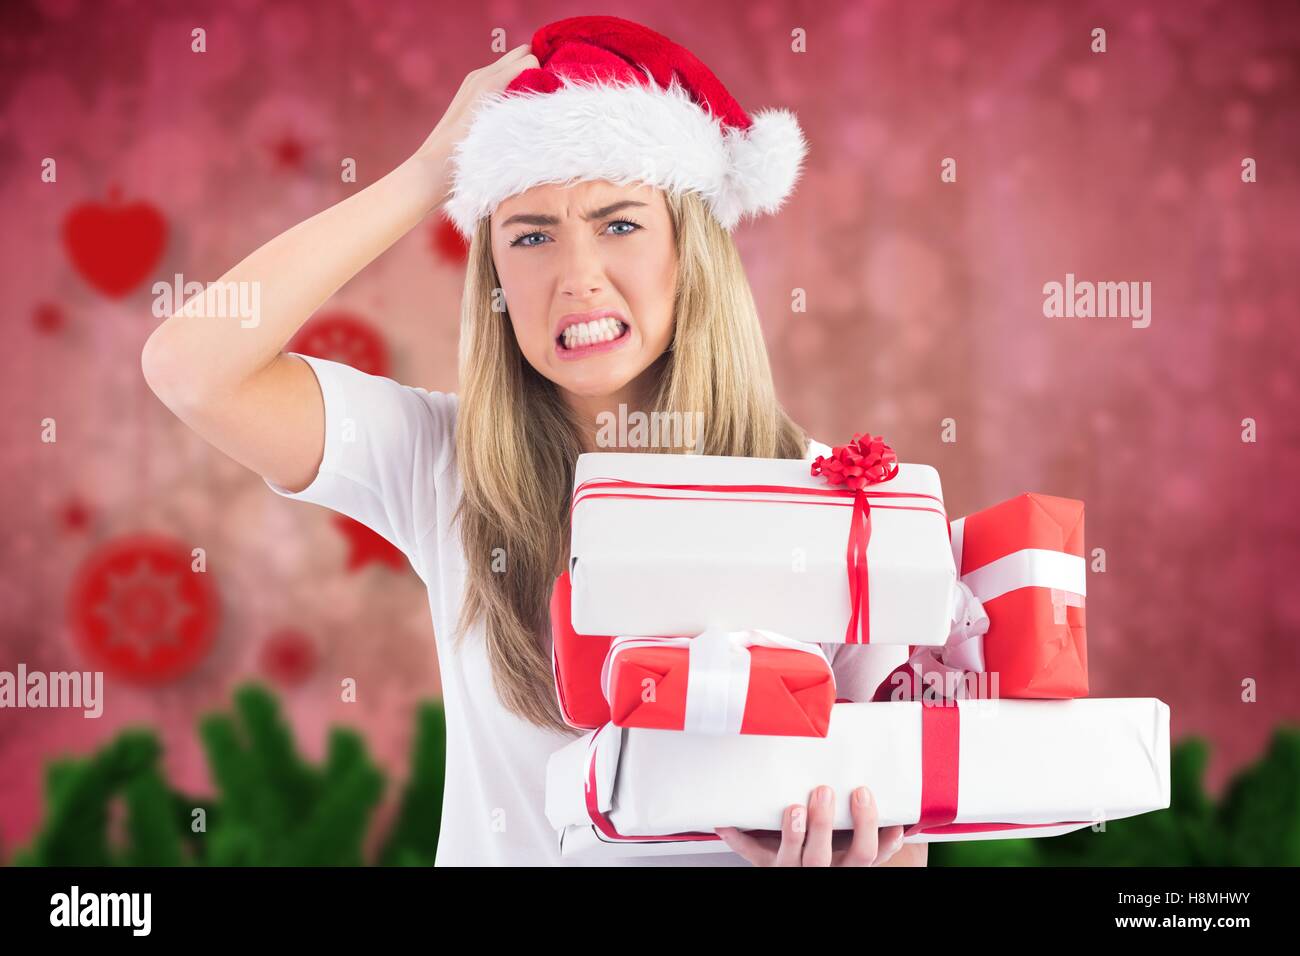 Frustrated woman in santa hat holding stack of gifts Stock Photo